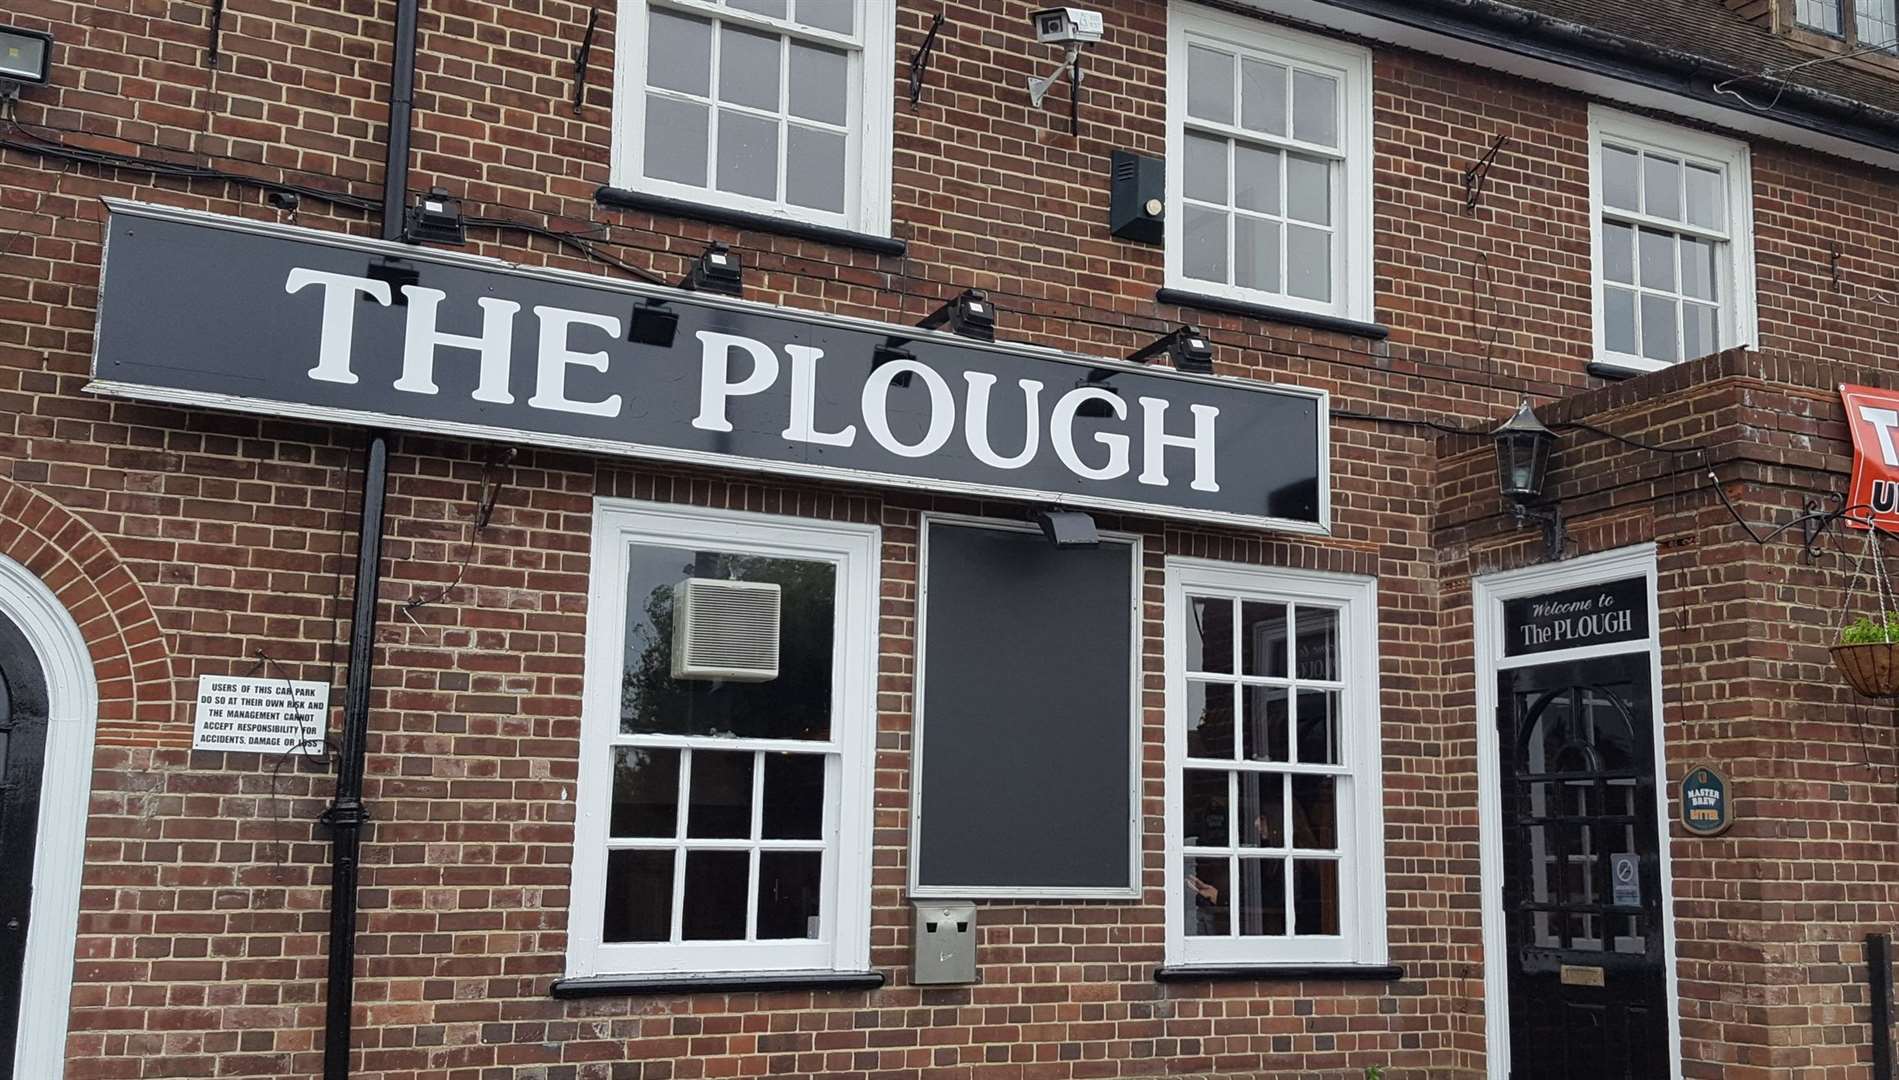 Alfie will play for The Plough pub, Swalecliffe, near Whitstable